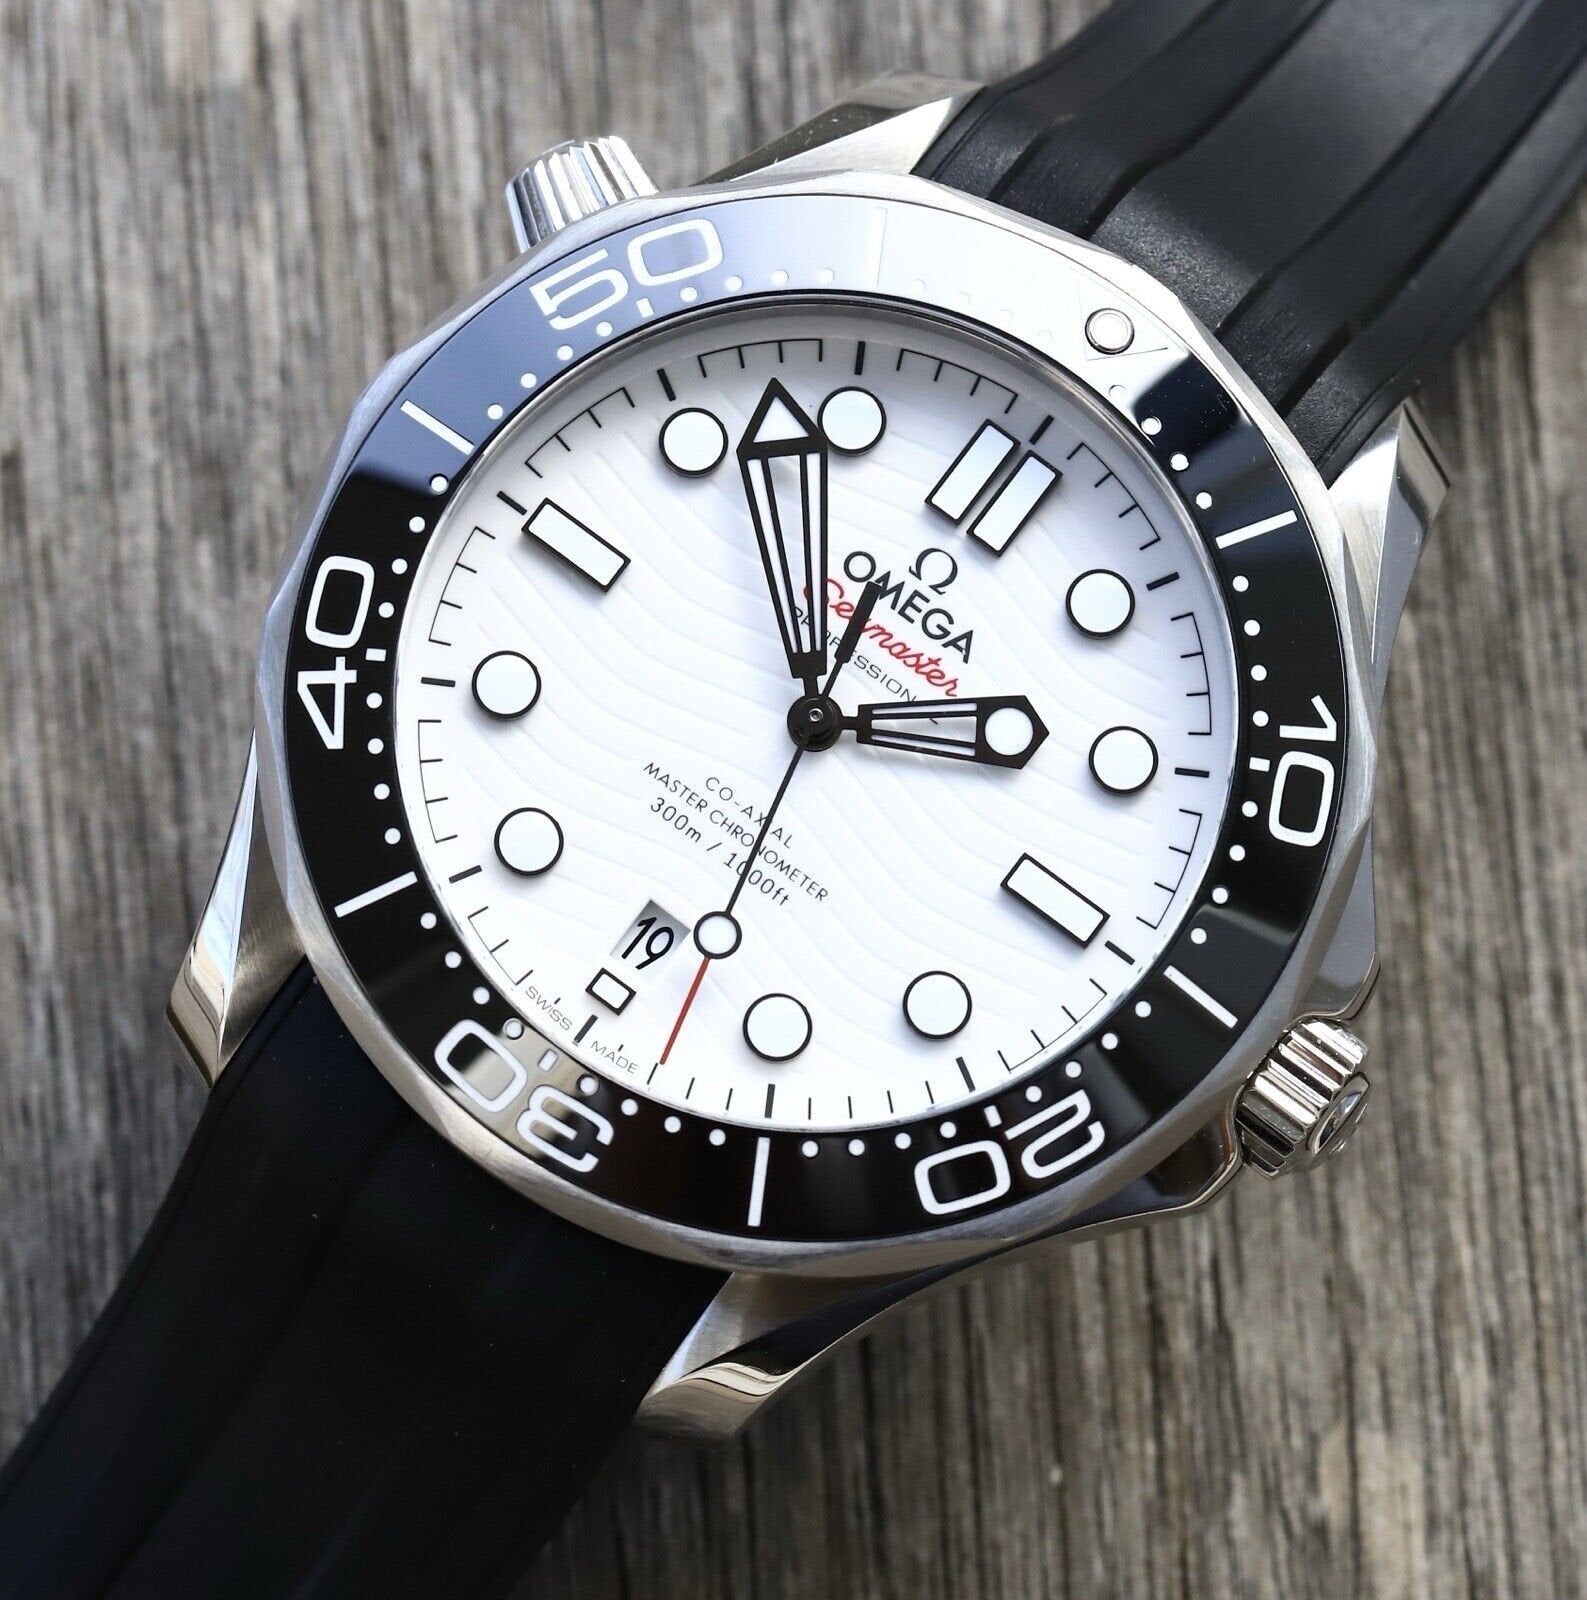 Omega_Seamaster_Diver_300M_Co-Axial_Great_White_42mm_210.32.42.20.04.001_Watch_Vault_03.jpg